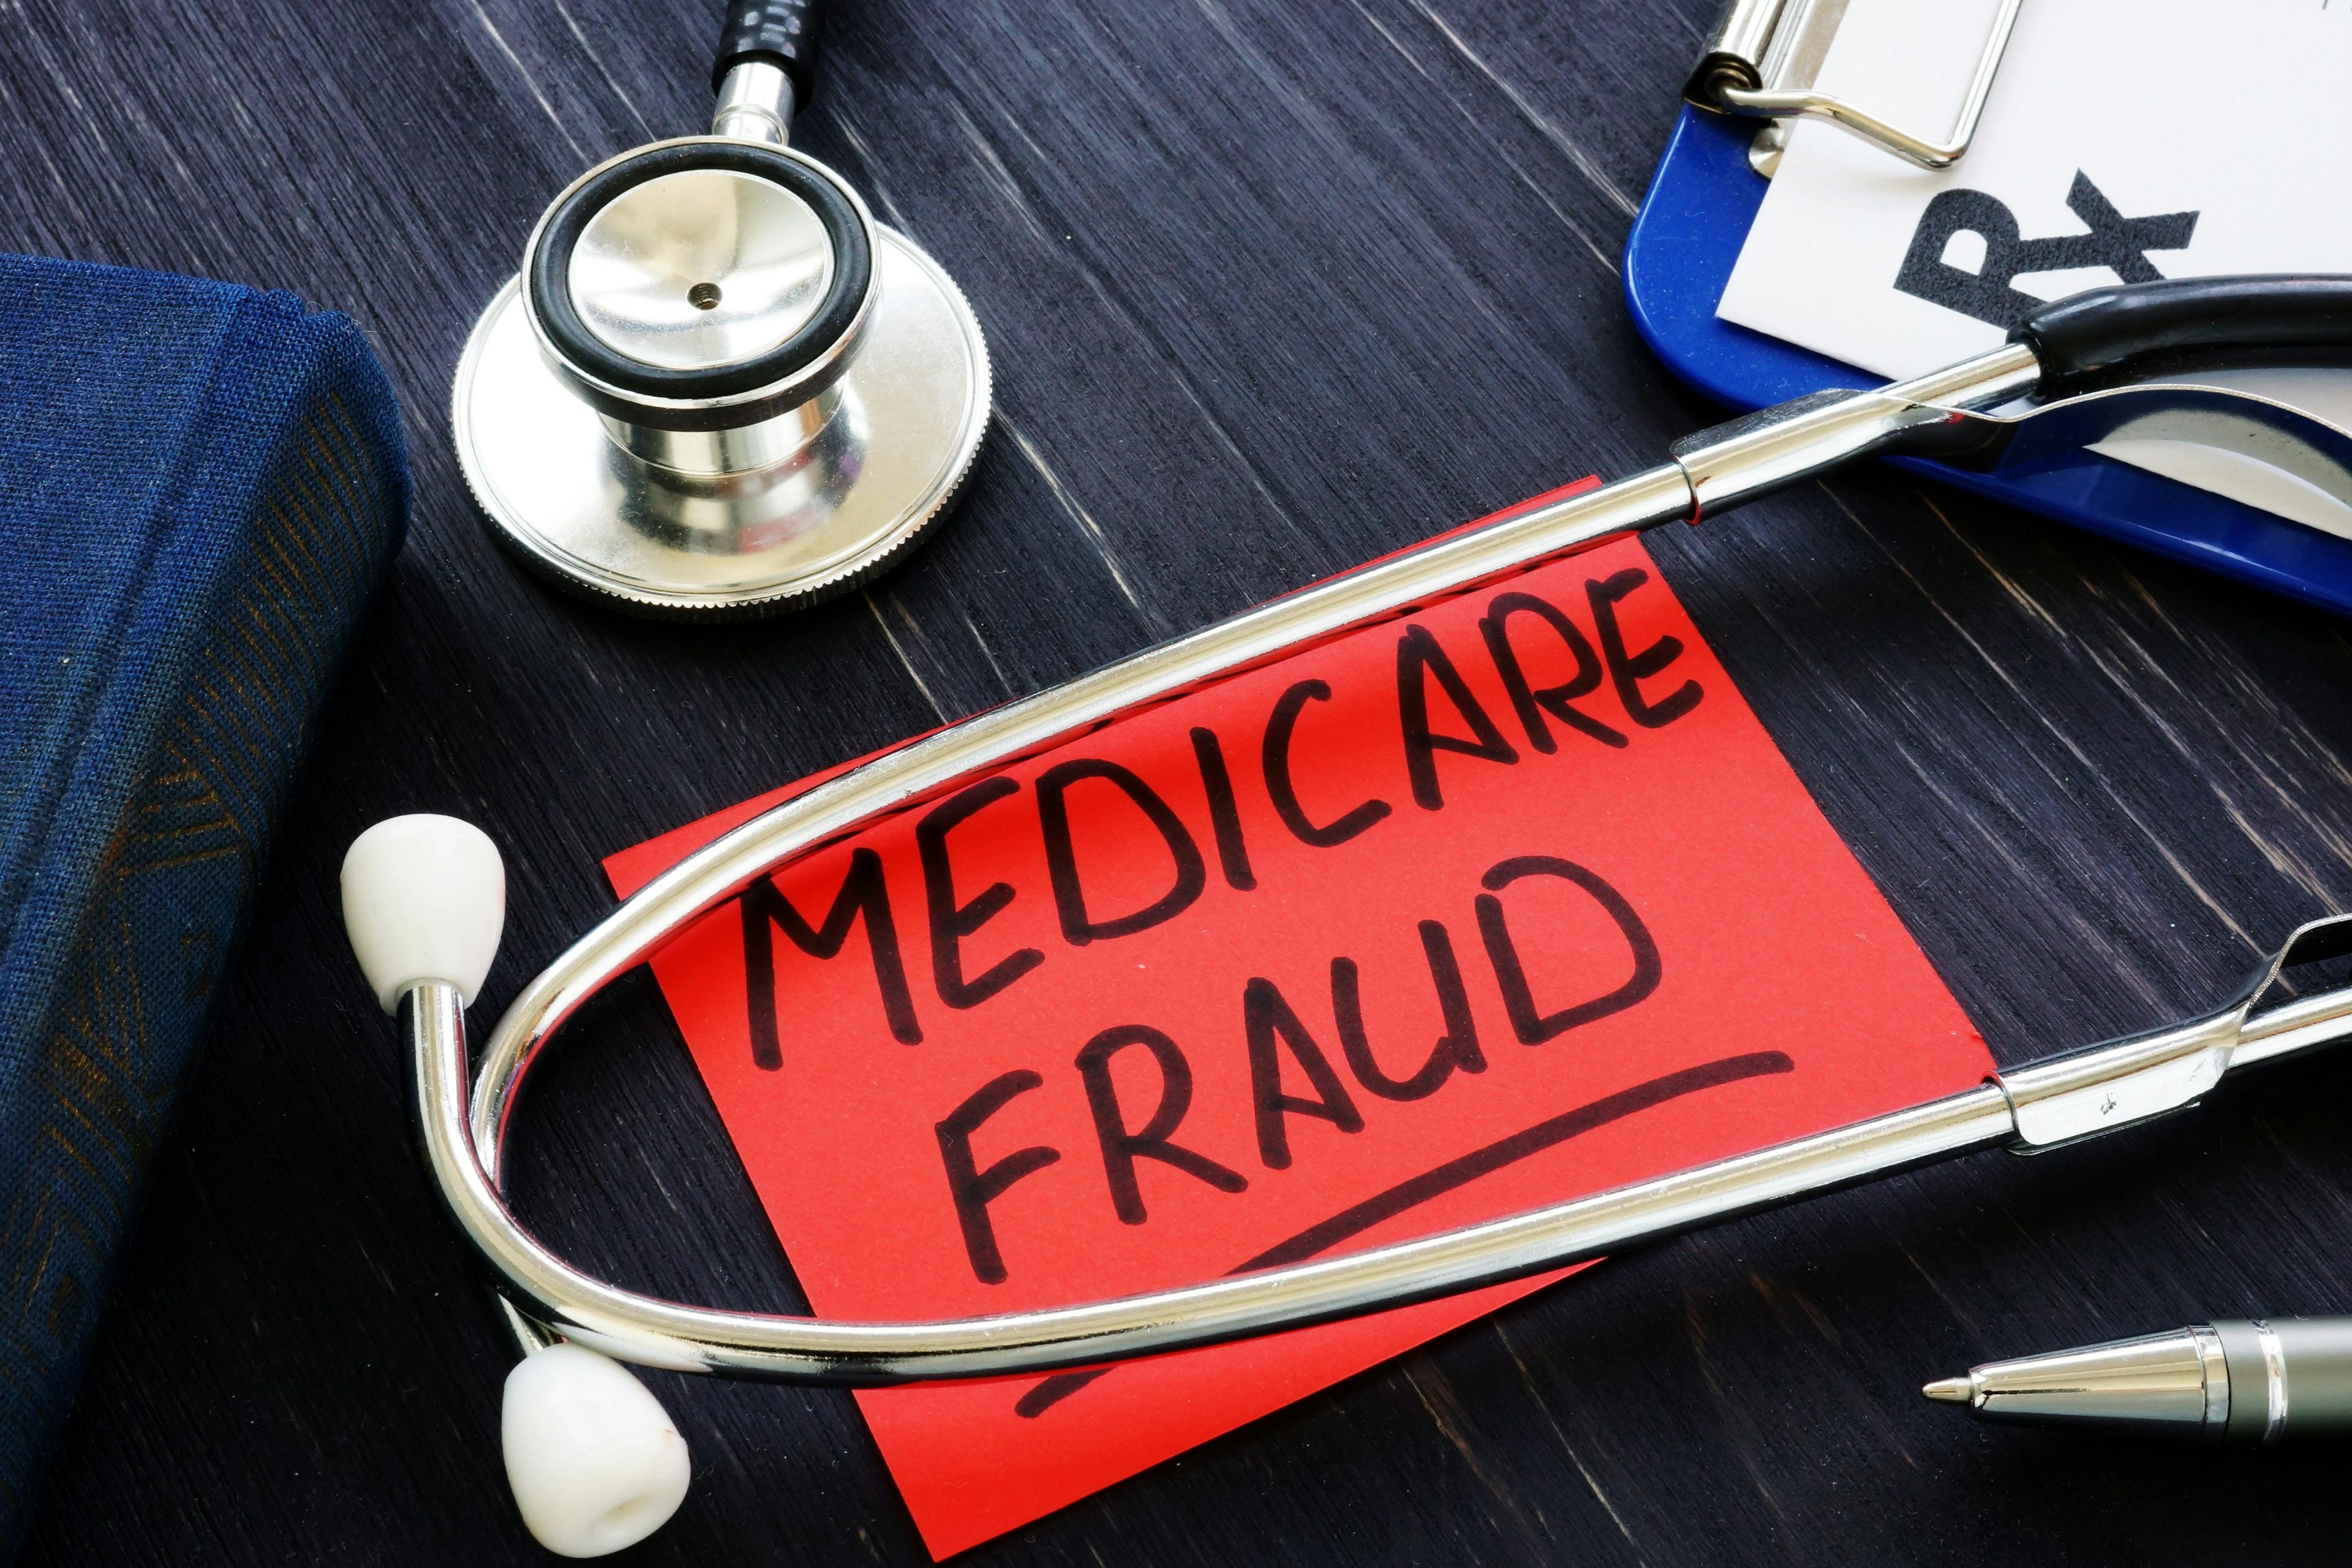 Medicare fraud: Feds convict Texas physician in $16 million scheme